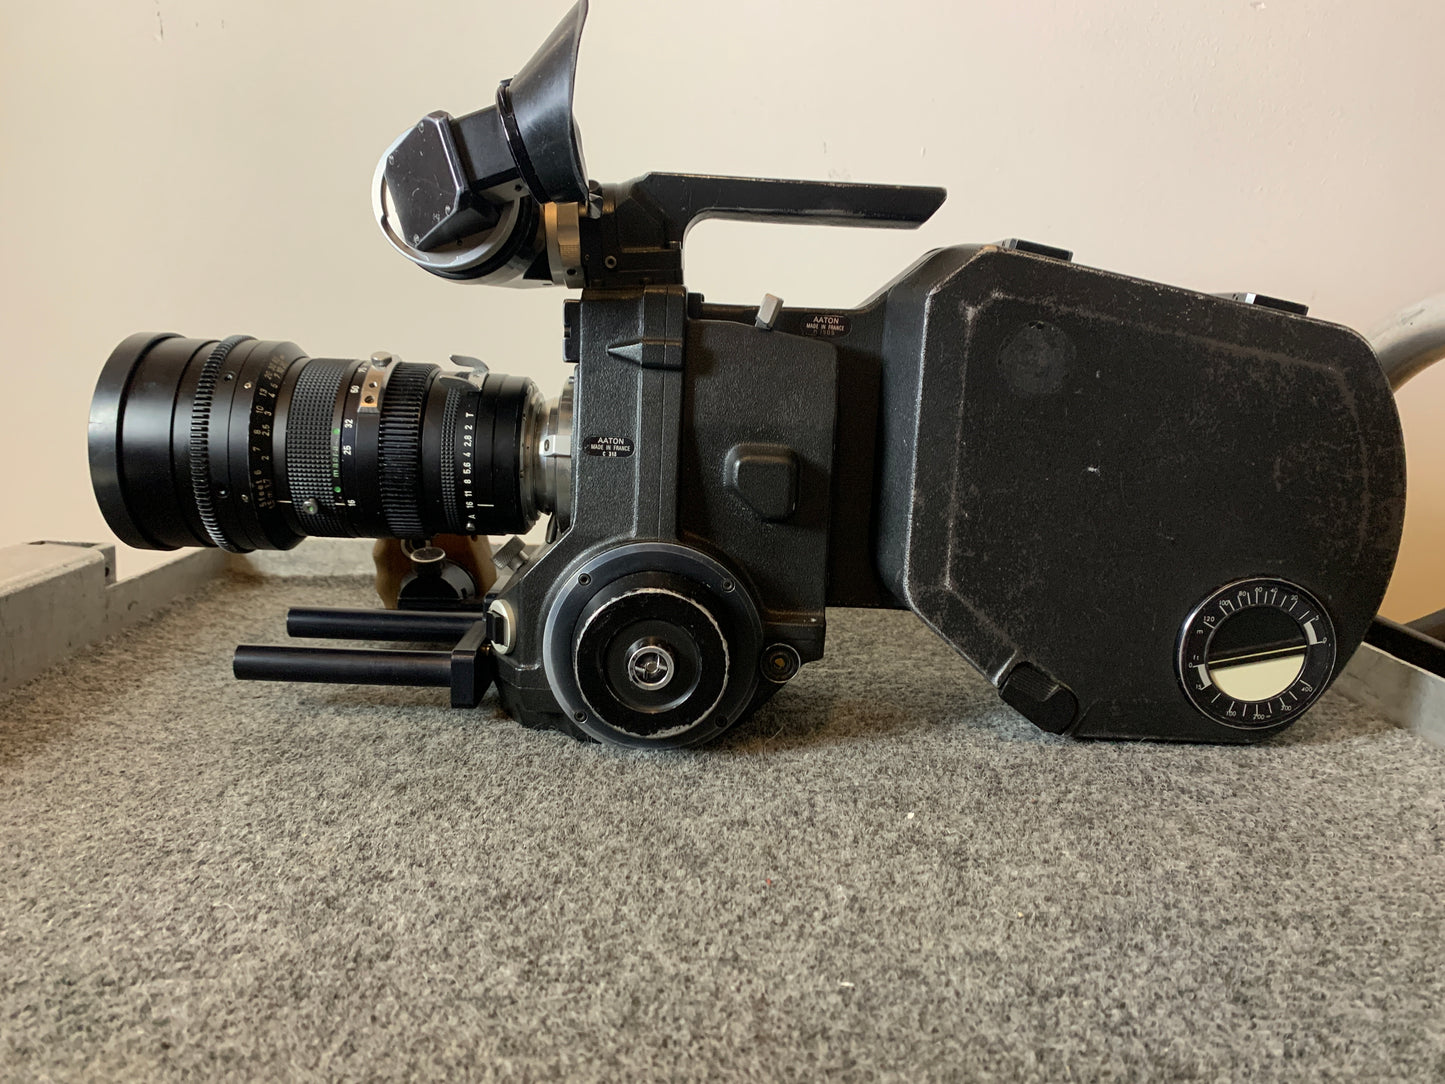 Aaton LTR32 16mm movie camera with Zeiss 10-100 T2 lens